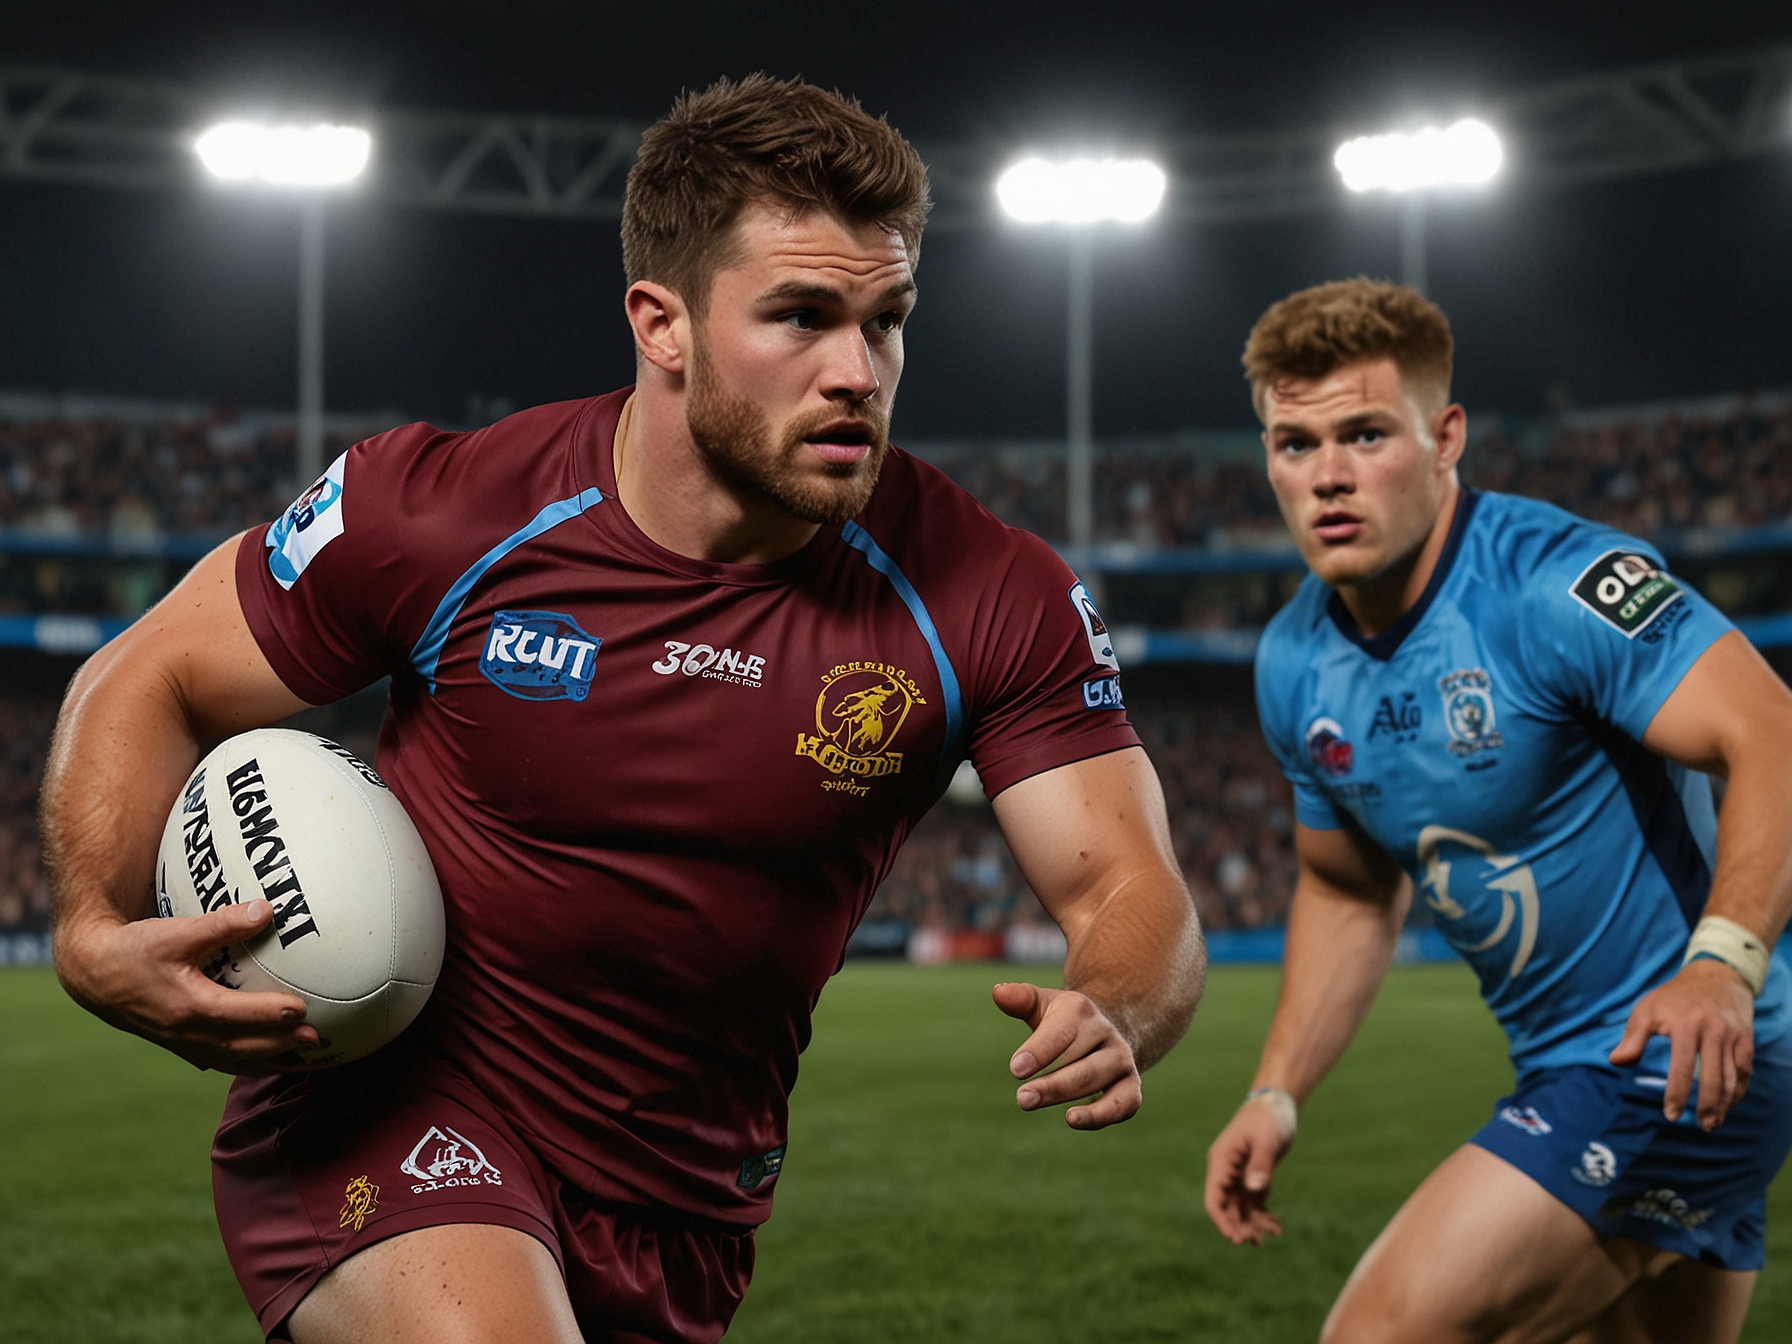 Liam Martin preparing for the second State of Origin game, emphasizing the need to target Reece Walsh to counter his influence on the field.